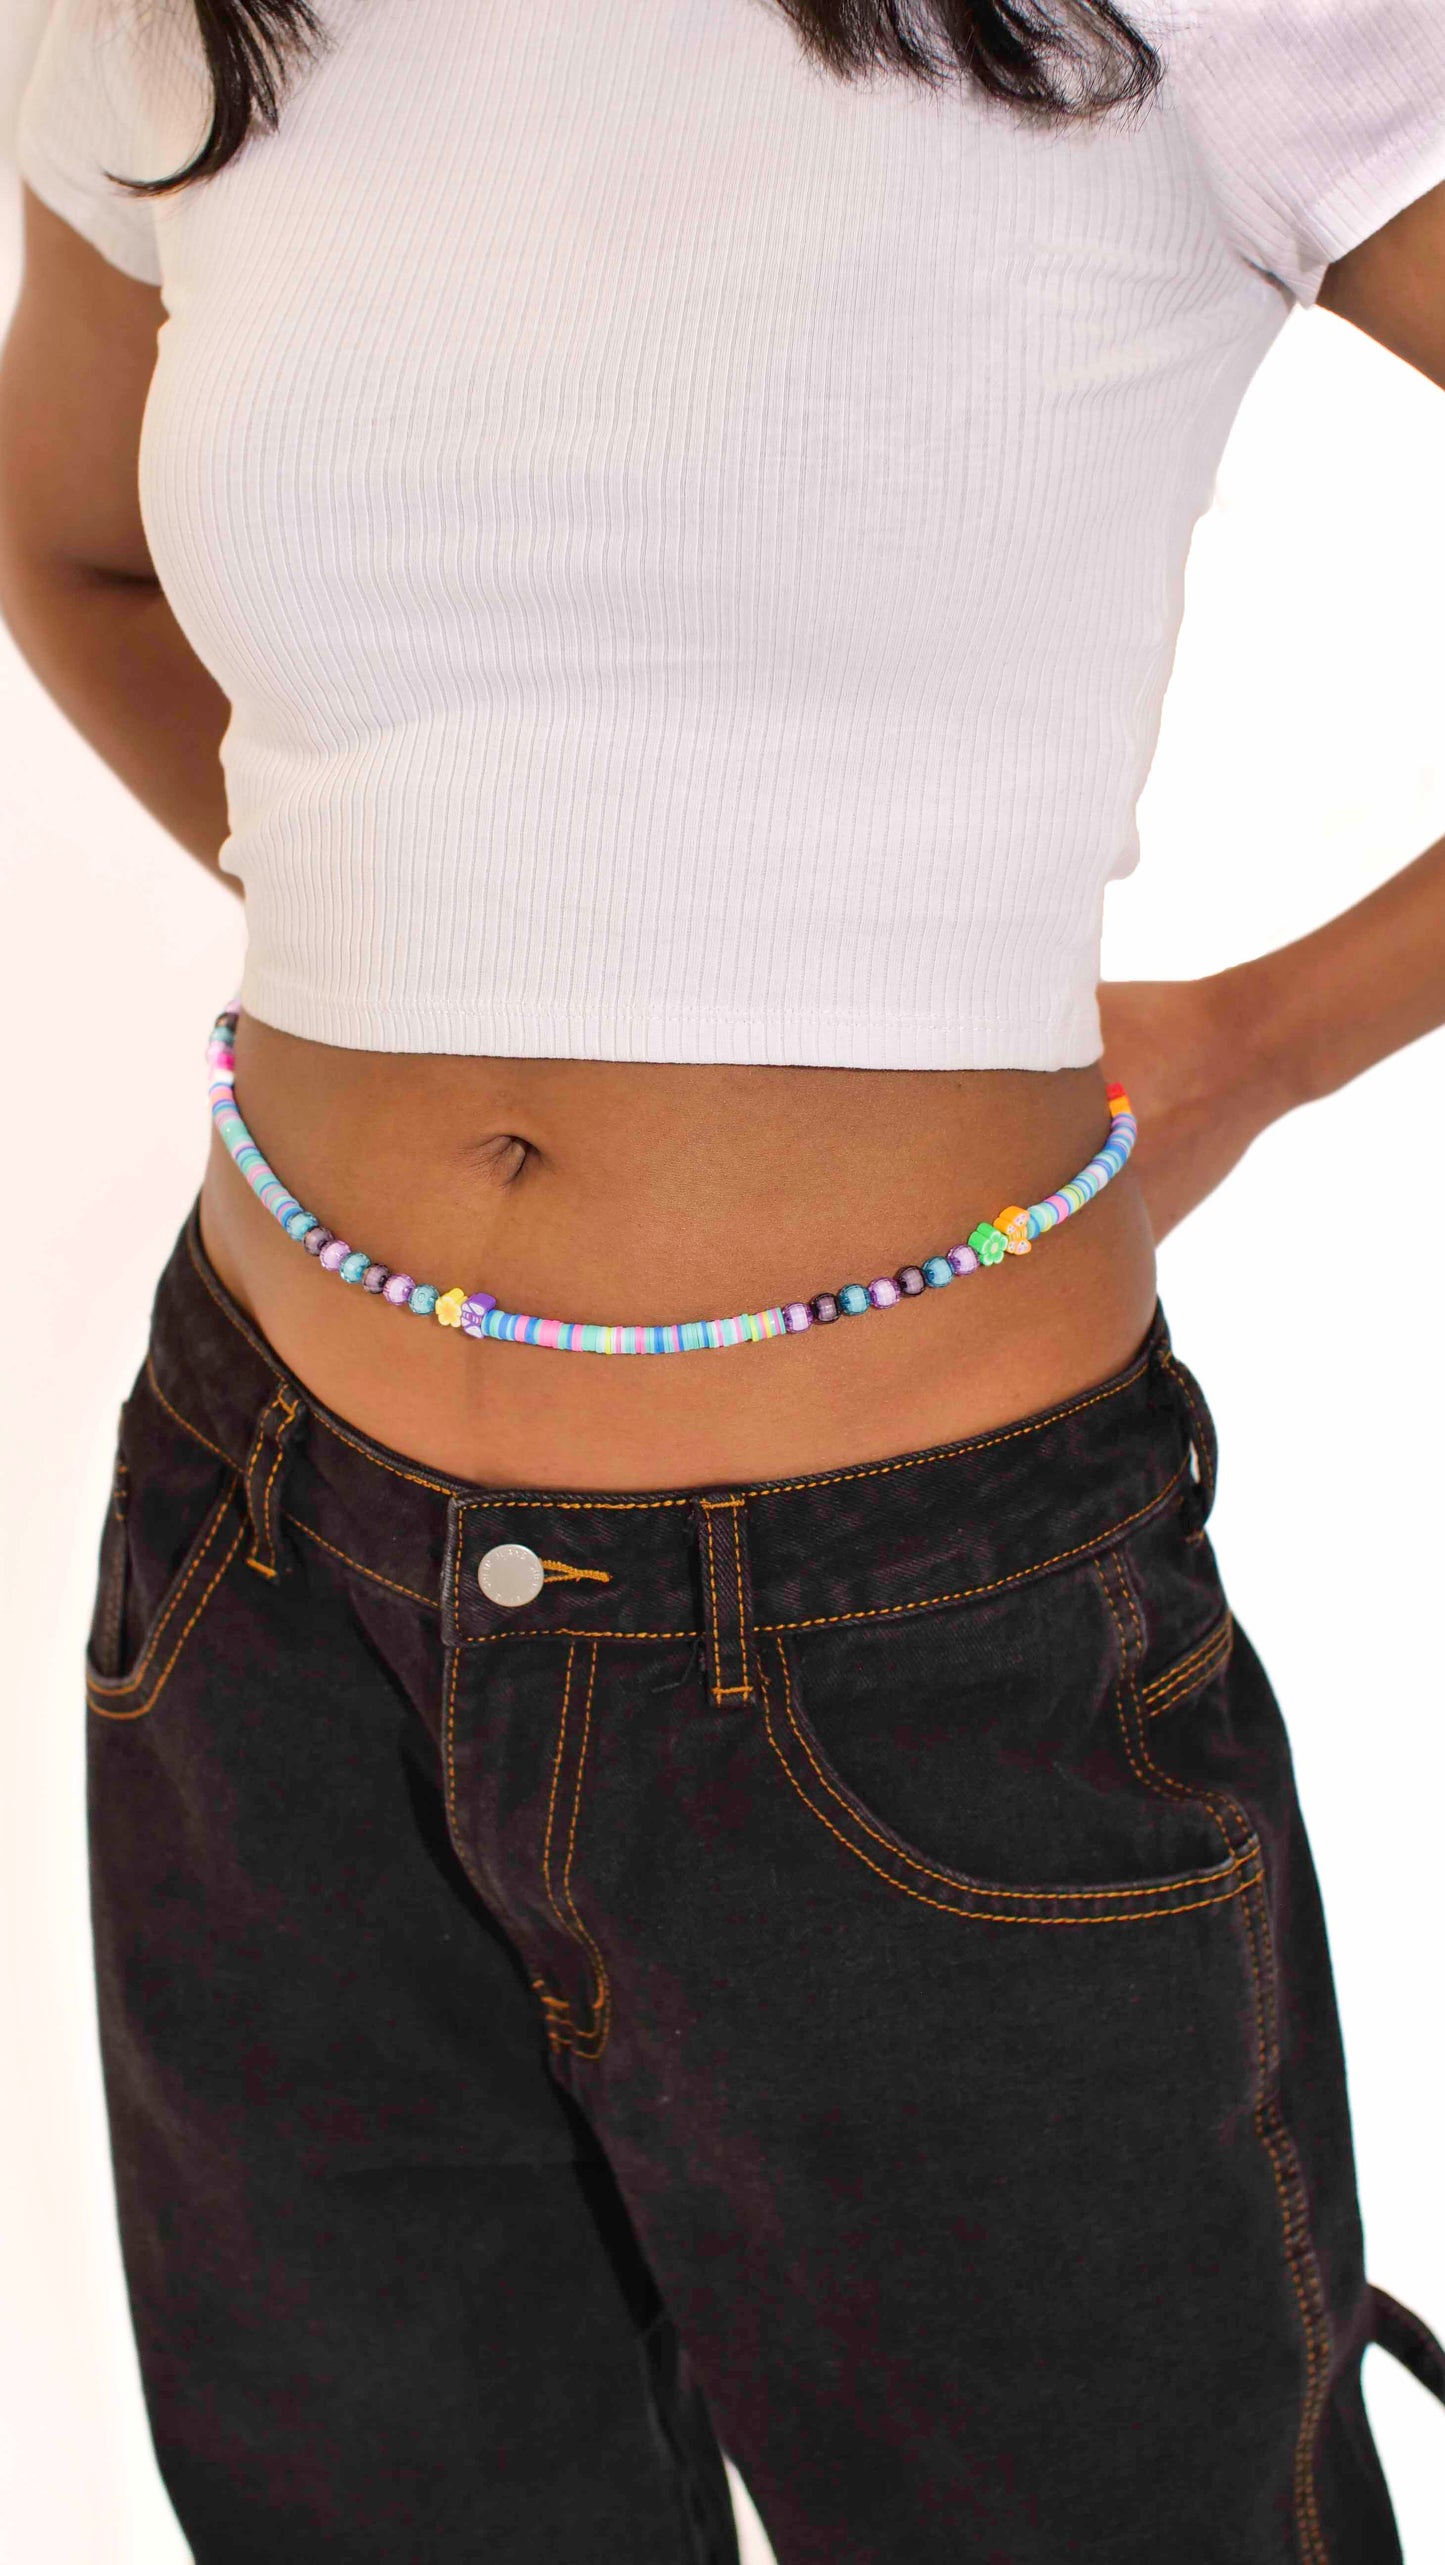 Handmade beaded belly chain made using multicolor flat rubber beads, flower and butterfly charms, and Discoball-like beads.